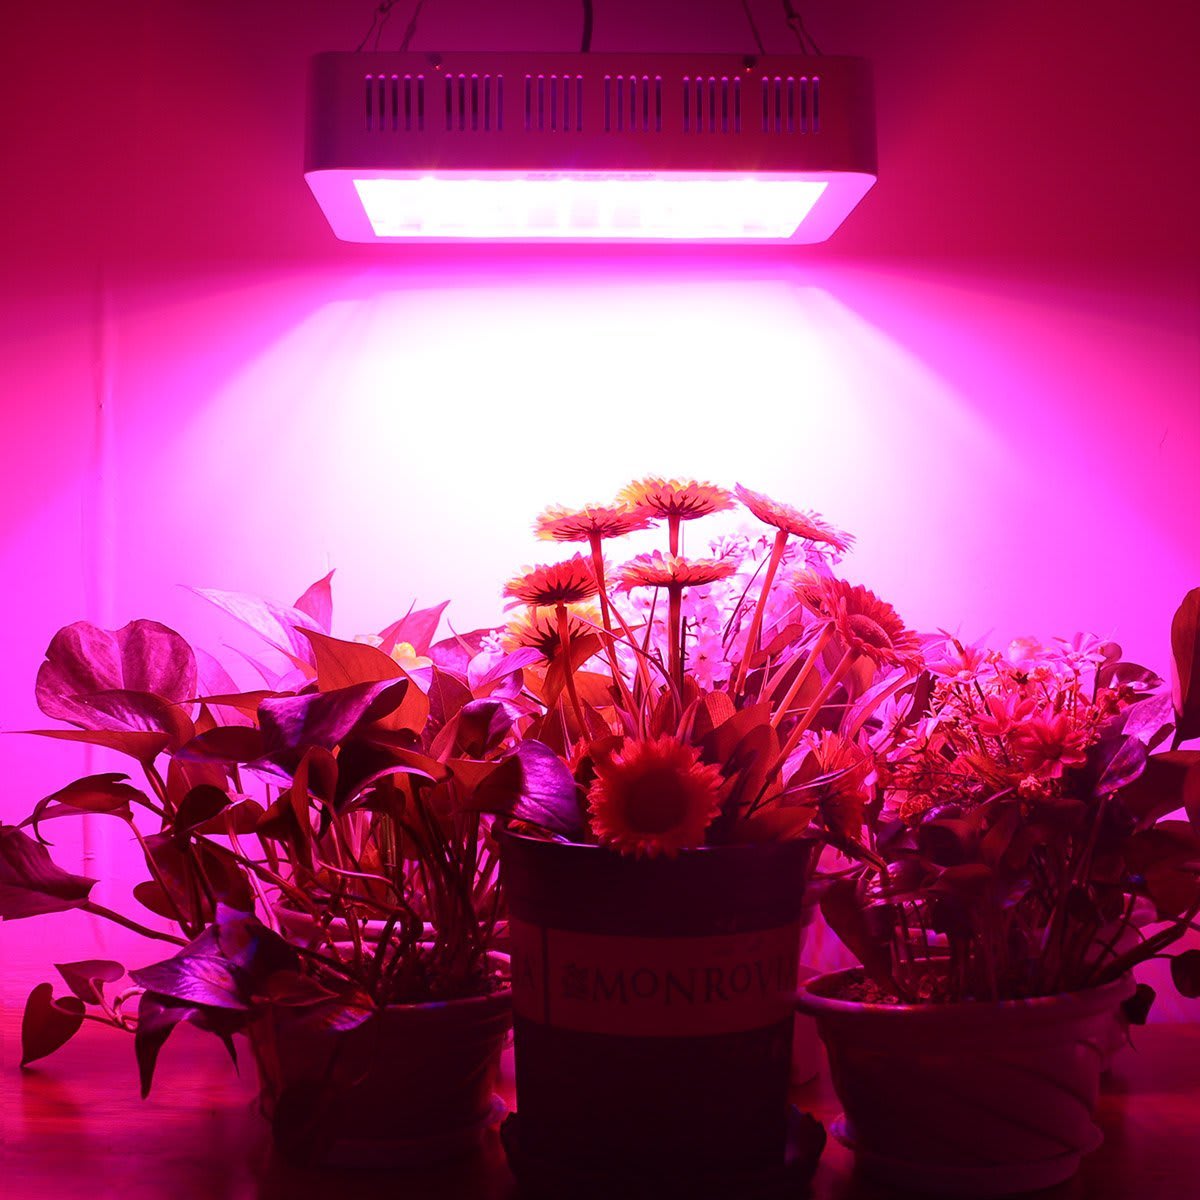 Morsen 1200W LED Review For Your Indoor Garden(Updated 2019)